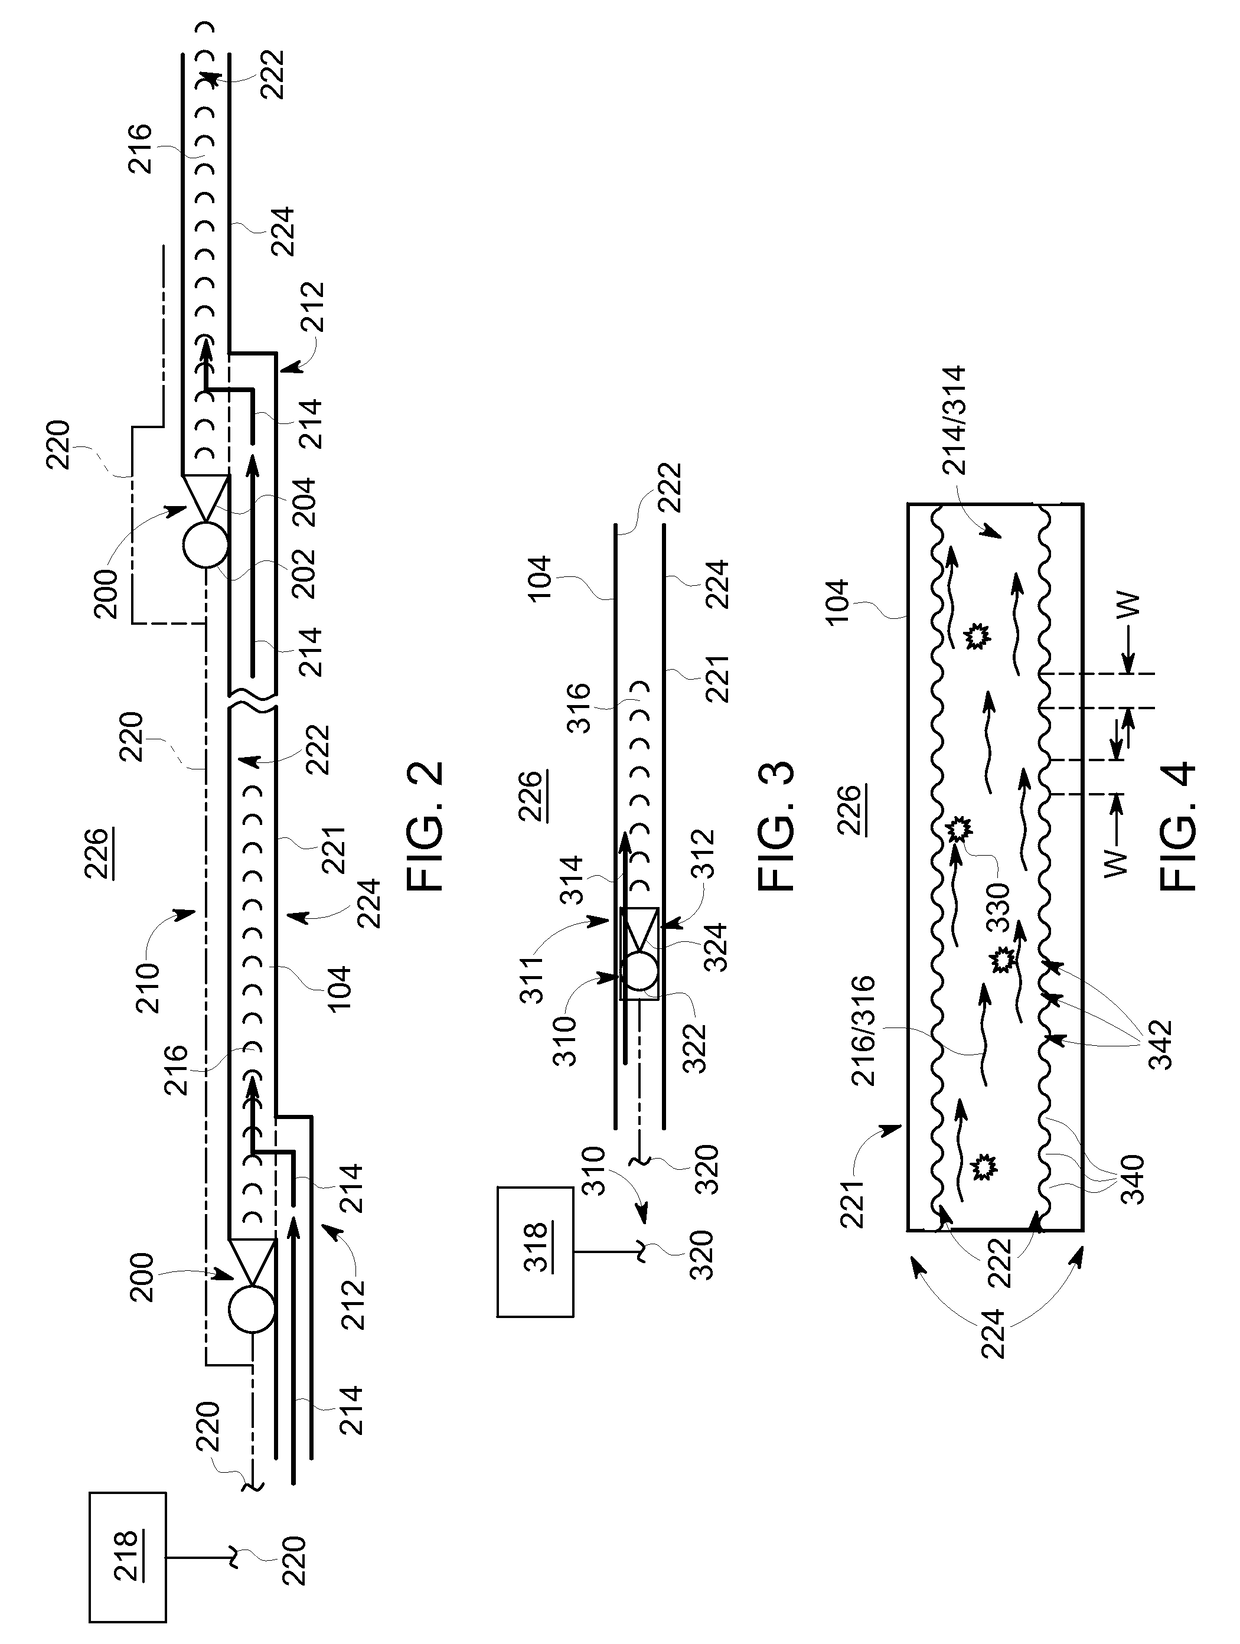 Microwave-based fluid conduit heating system and method of operating the same